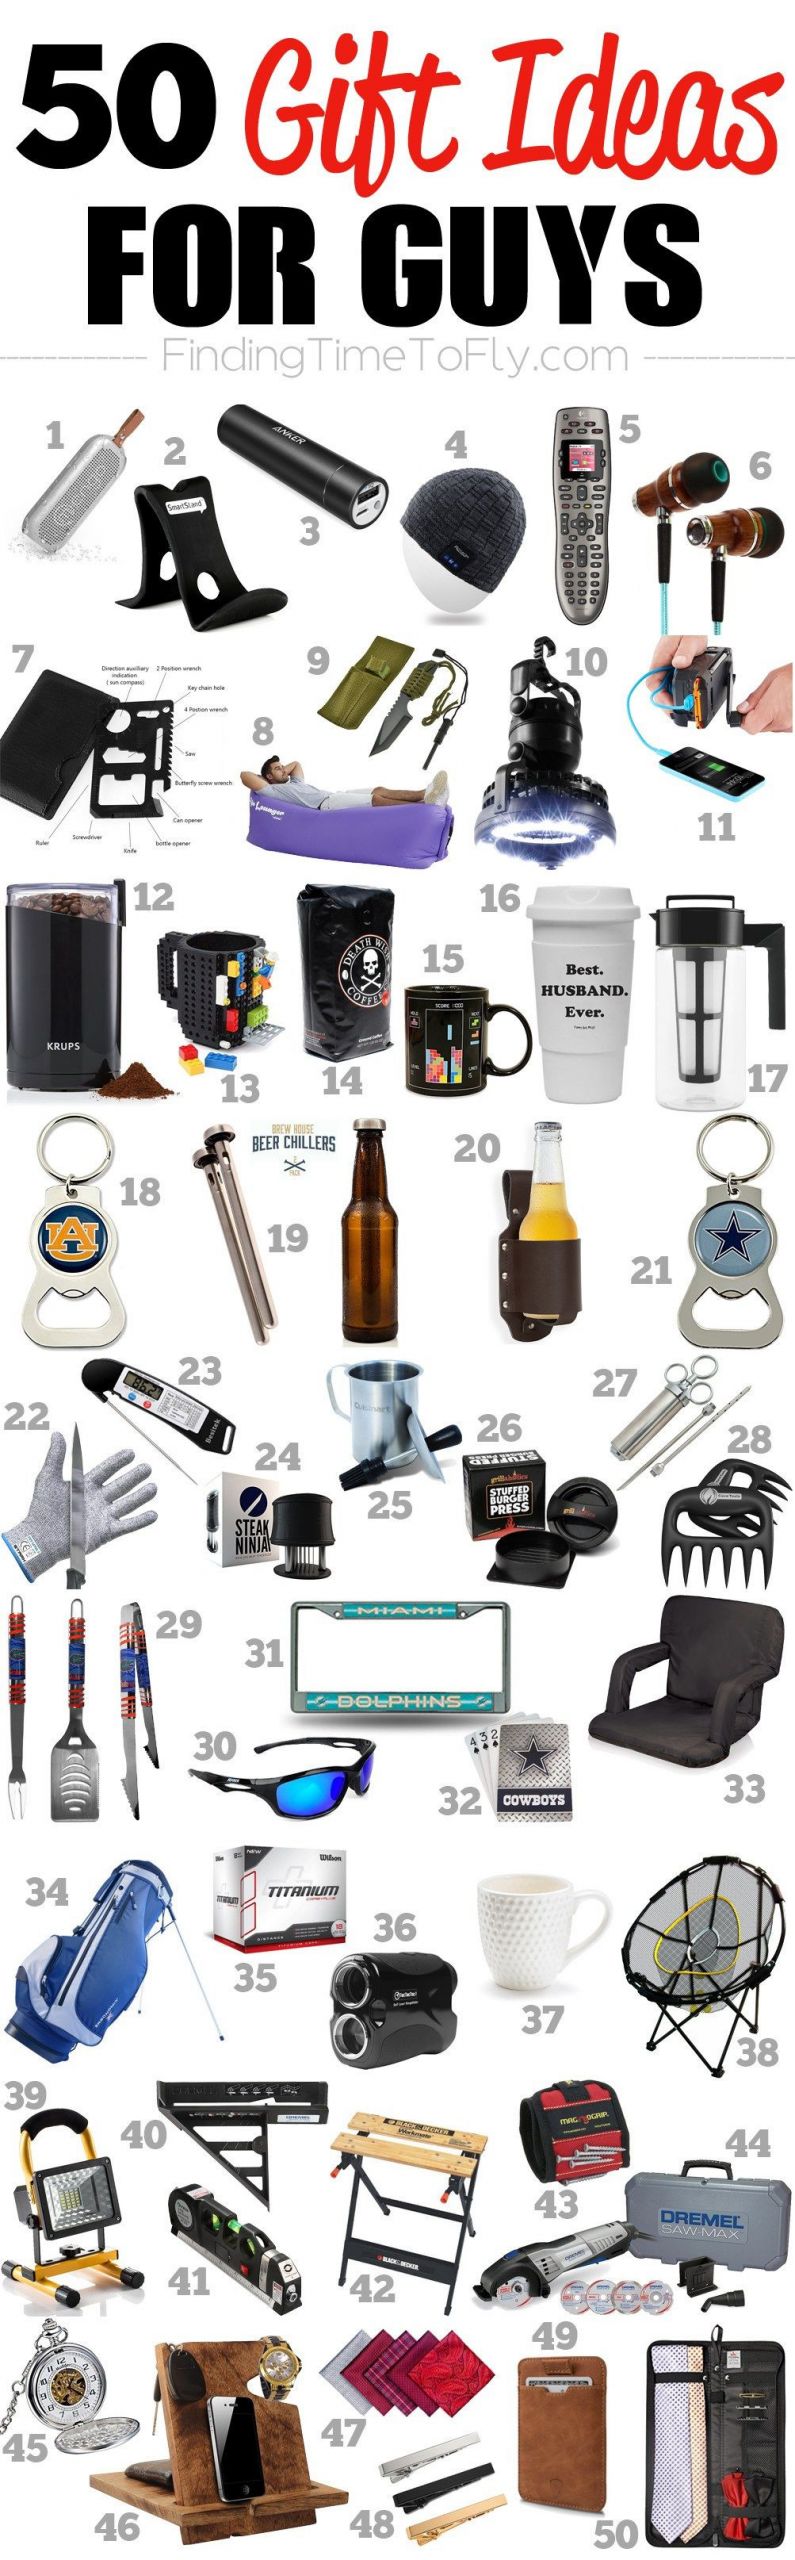 Men Graduation Gift Ideas
 50 Gifts for Guys for Every Occasion